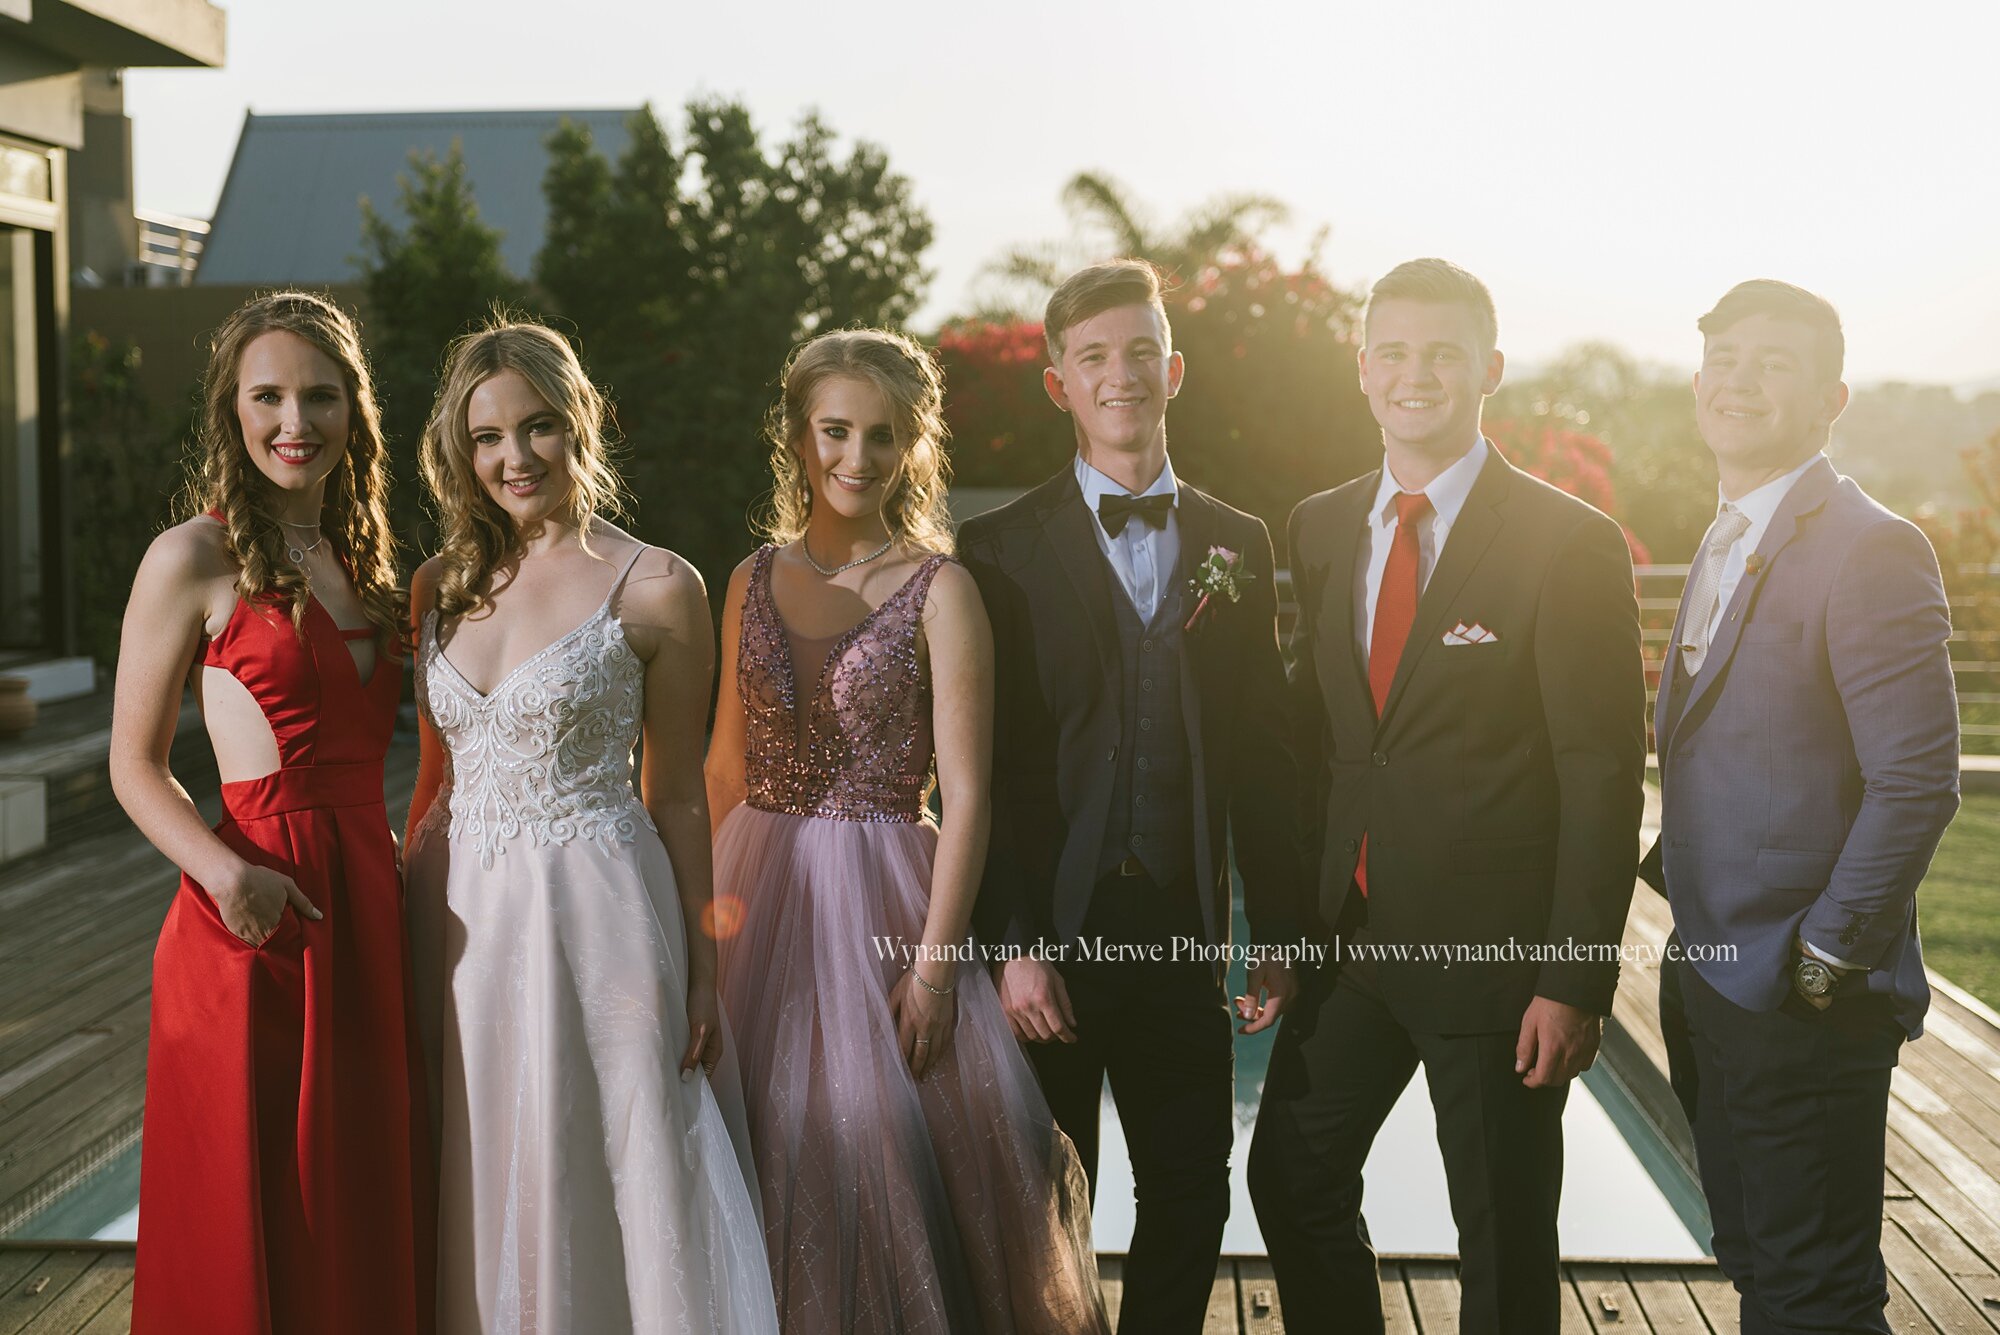 Copy of Liezl and friends matric farewell